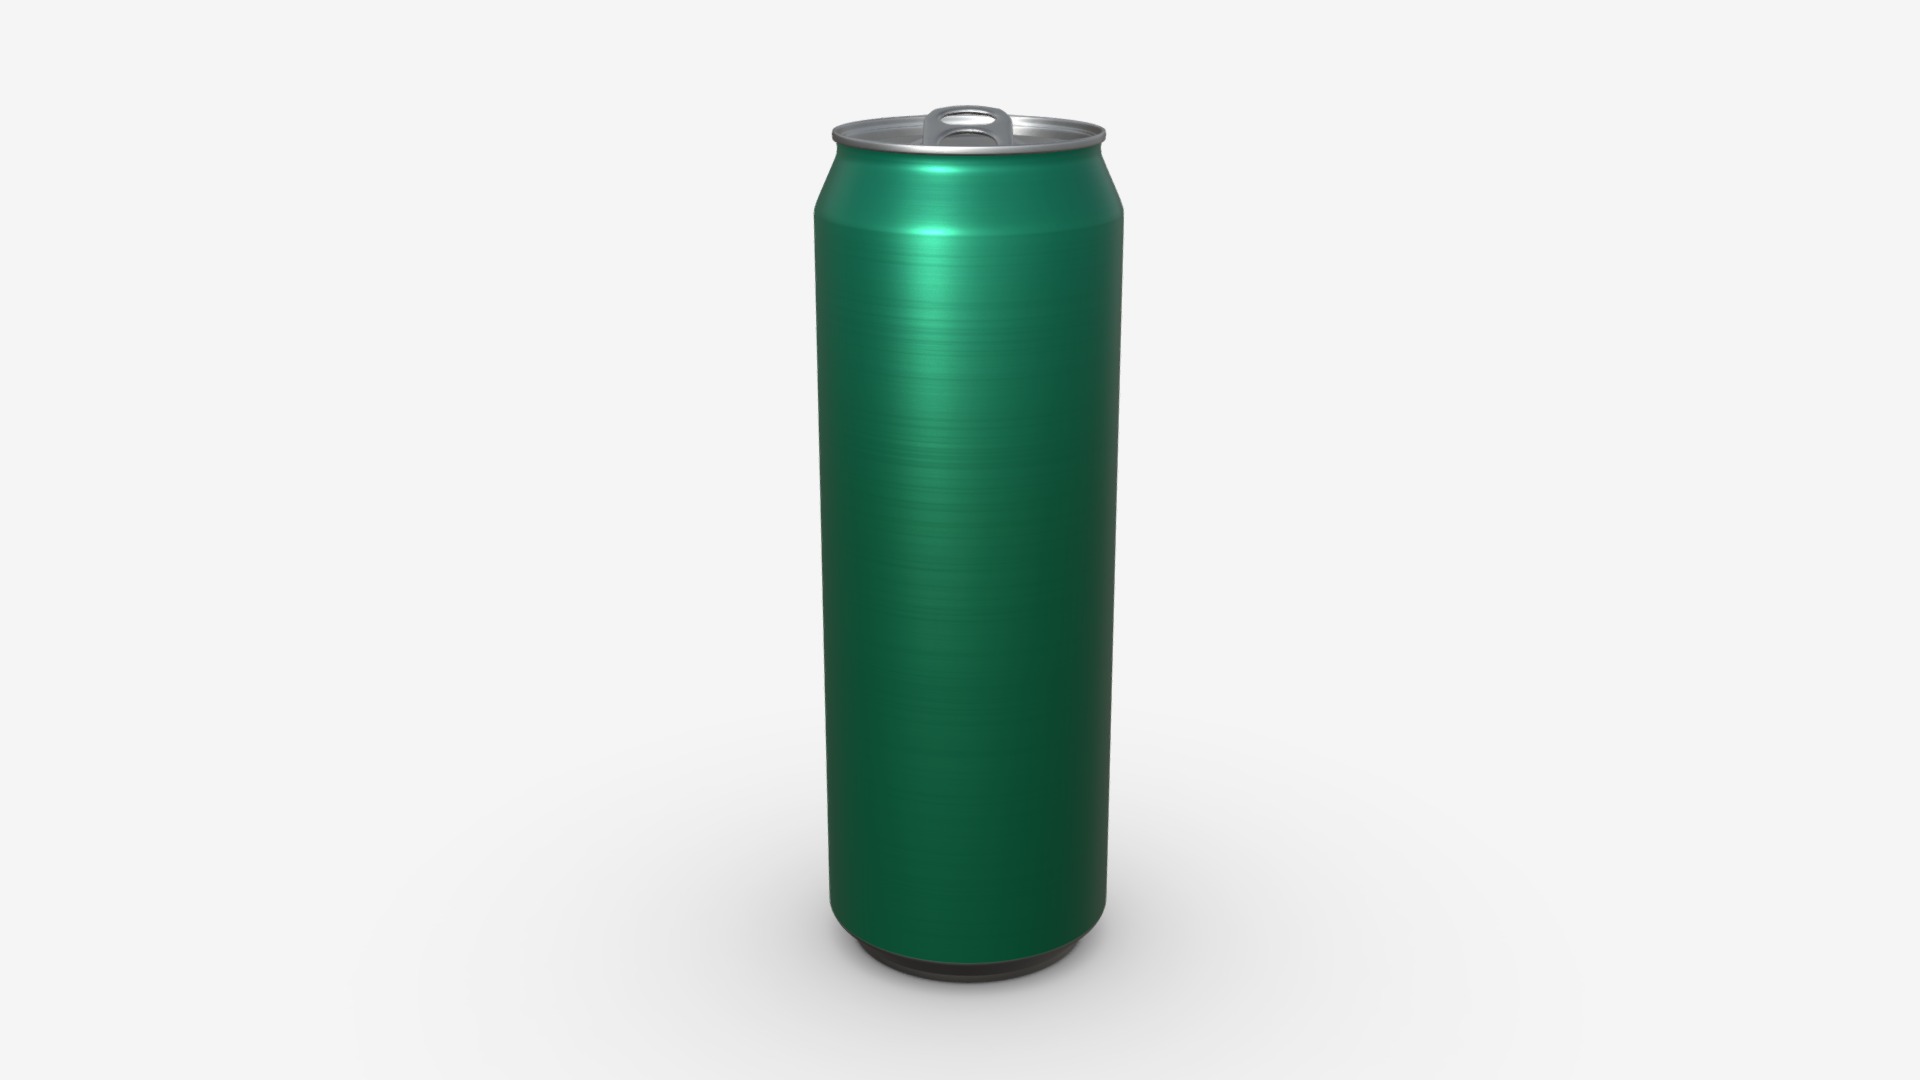 3D model Standard beverage can 568ml 1 pint - This is a 3D model of the Standard beverage can 568ml 1 pint. The 3D model is about a green cylindrical object.